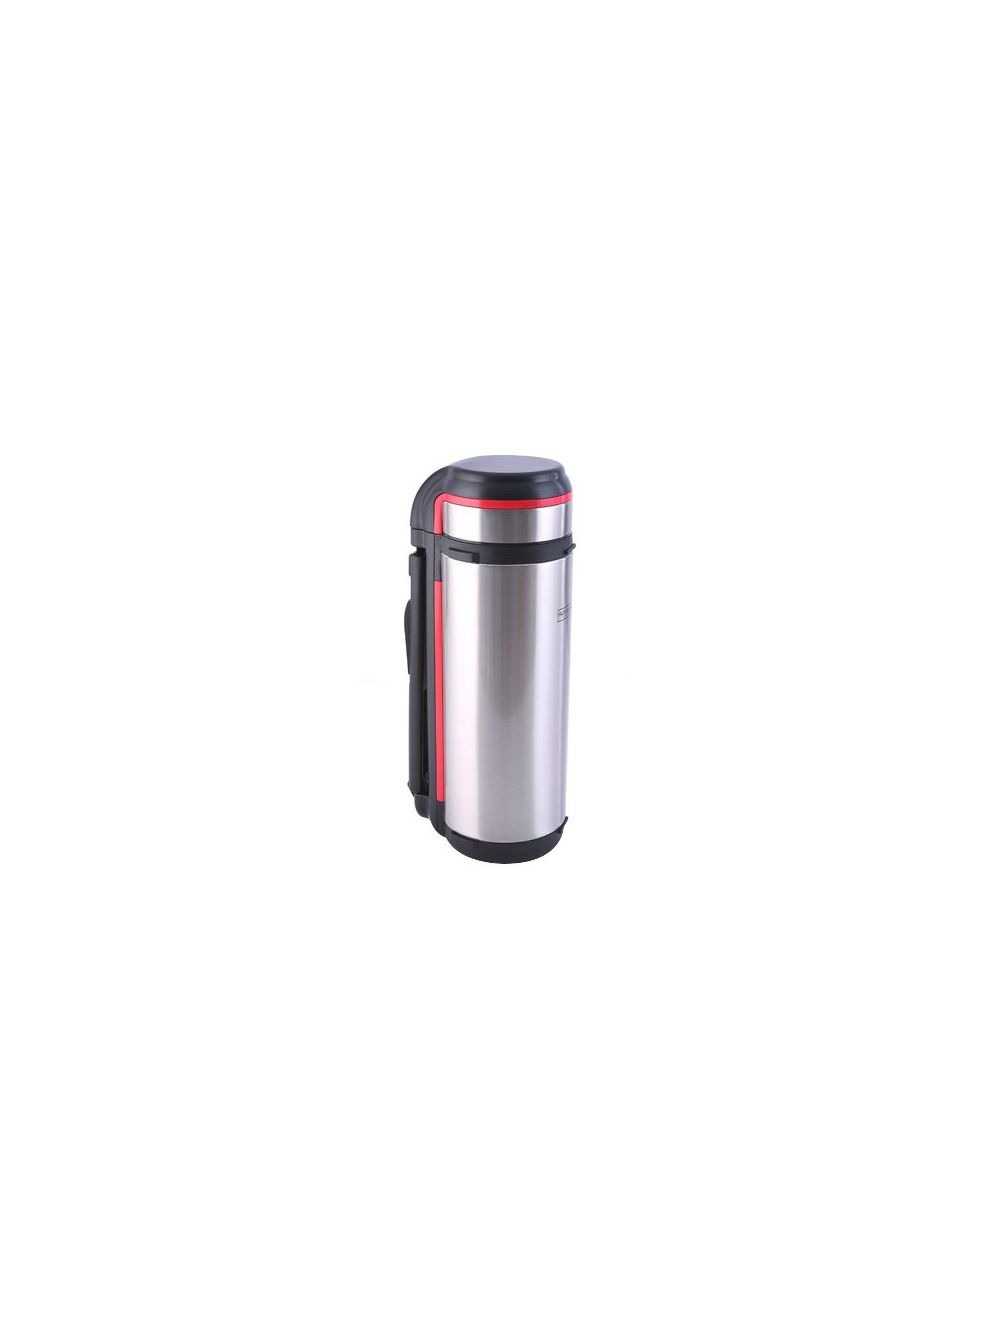 Royalford RF7668 Double Wall Stainless Steel Bullet Flask, 1.2L